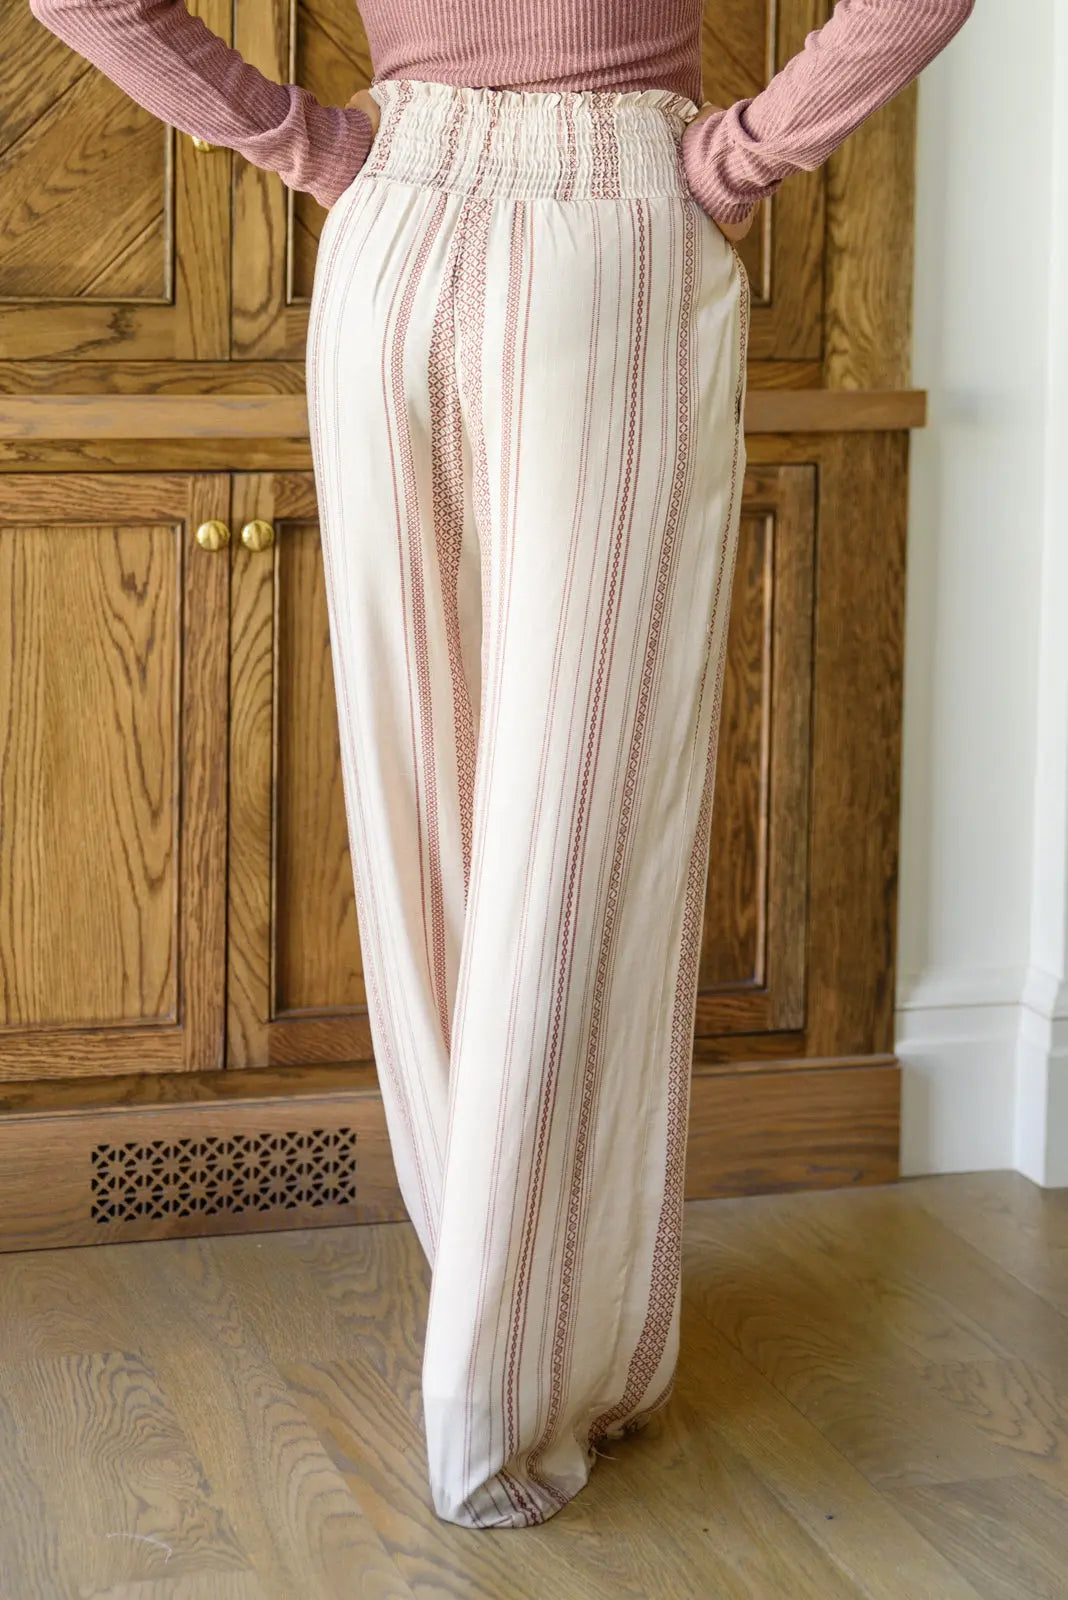 Casual Days Ahead Pink Striped Wide Leg Pants Womens Southern Soul Collectives 